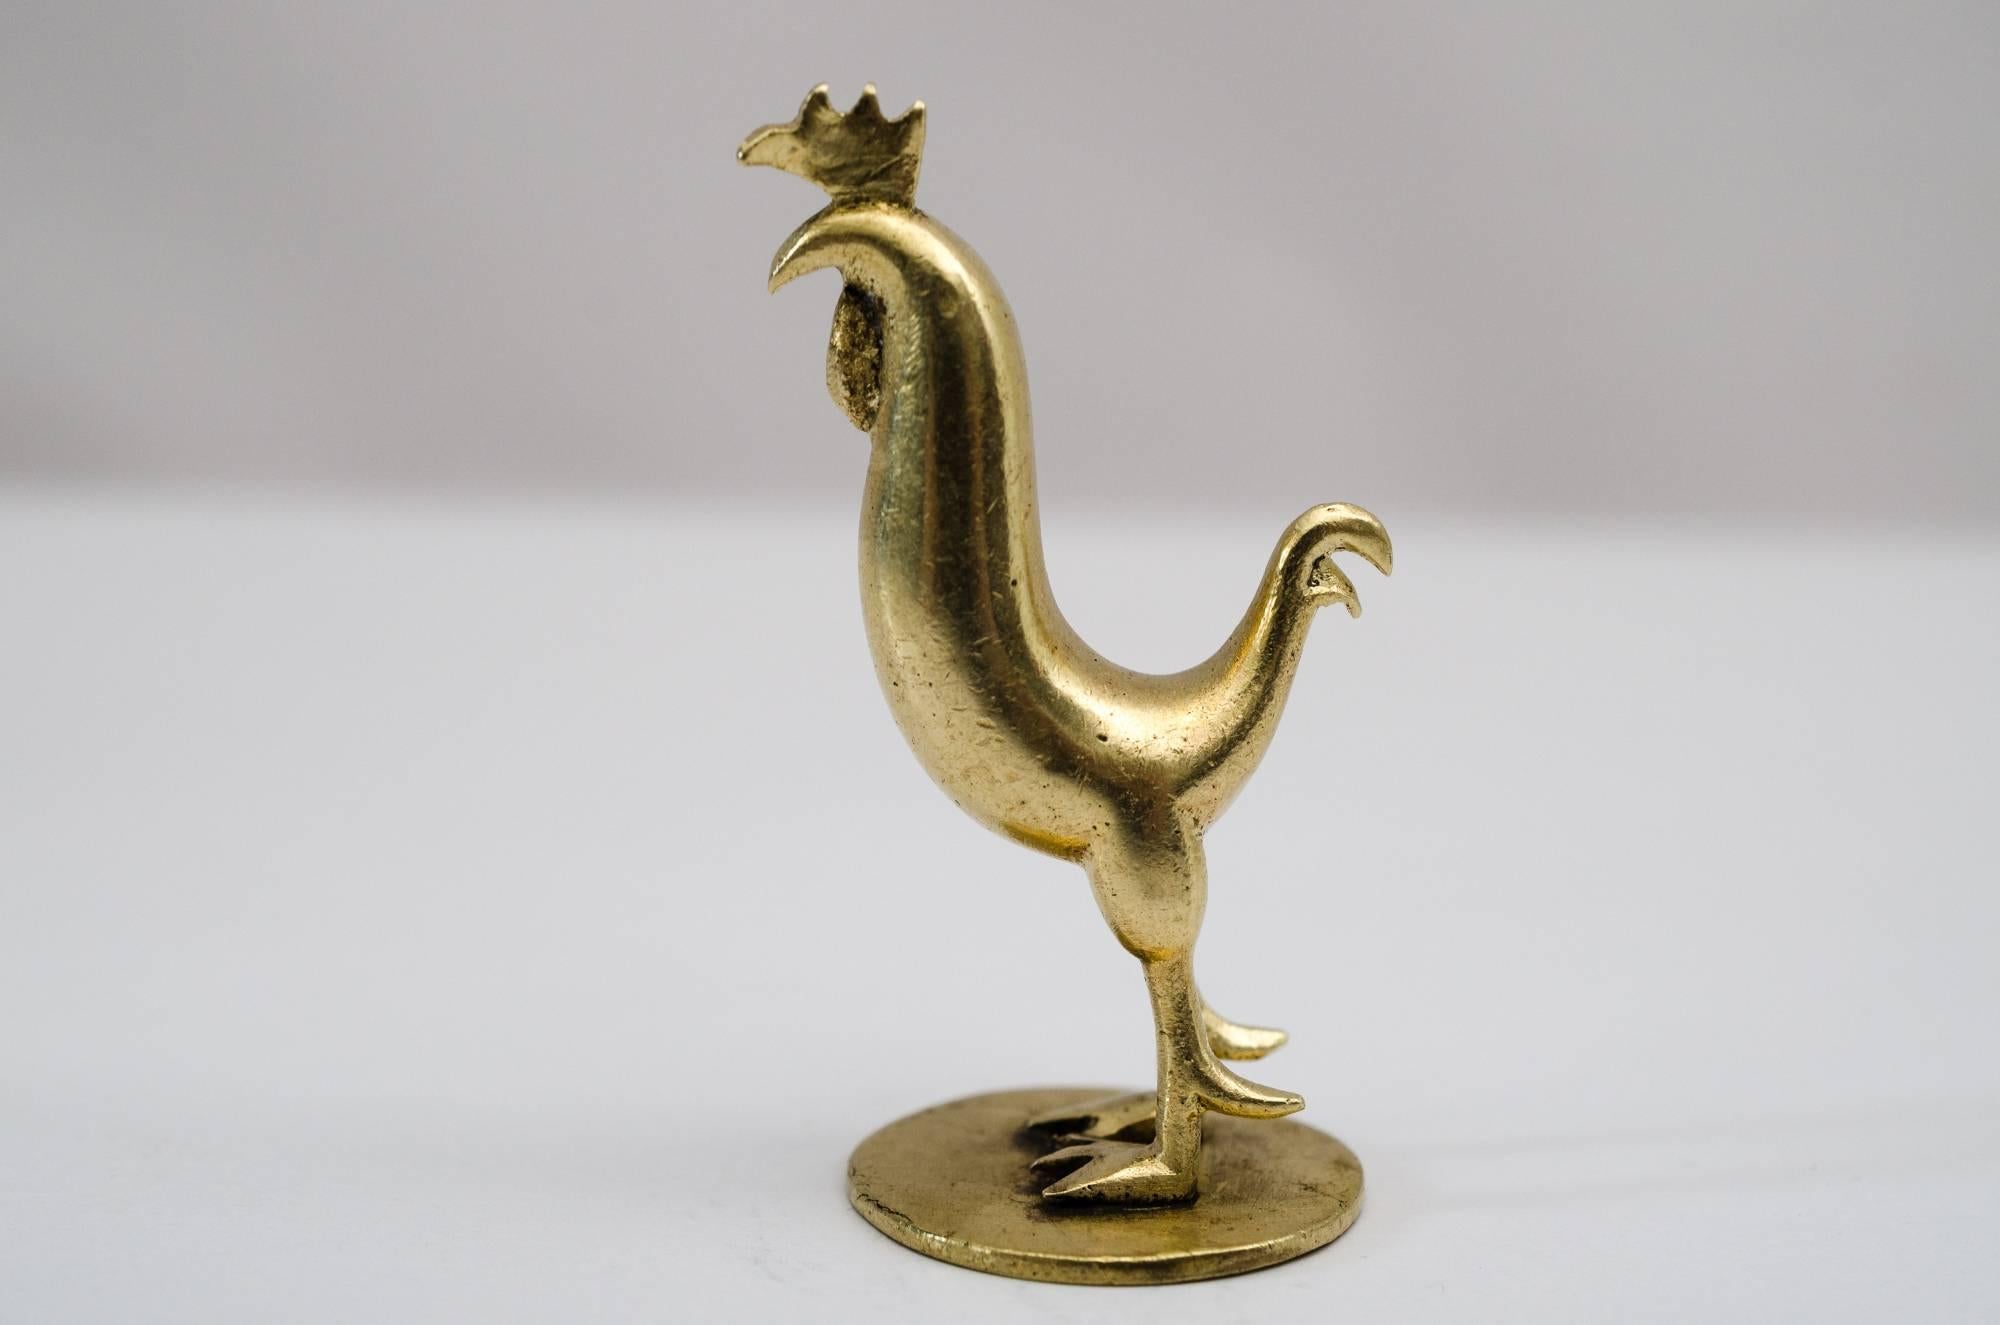 Rooster figurine by Hagenauer
Original condition
marked on the bottom (see the last Picture).